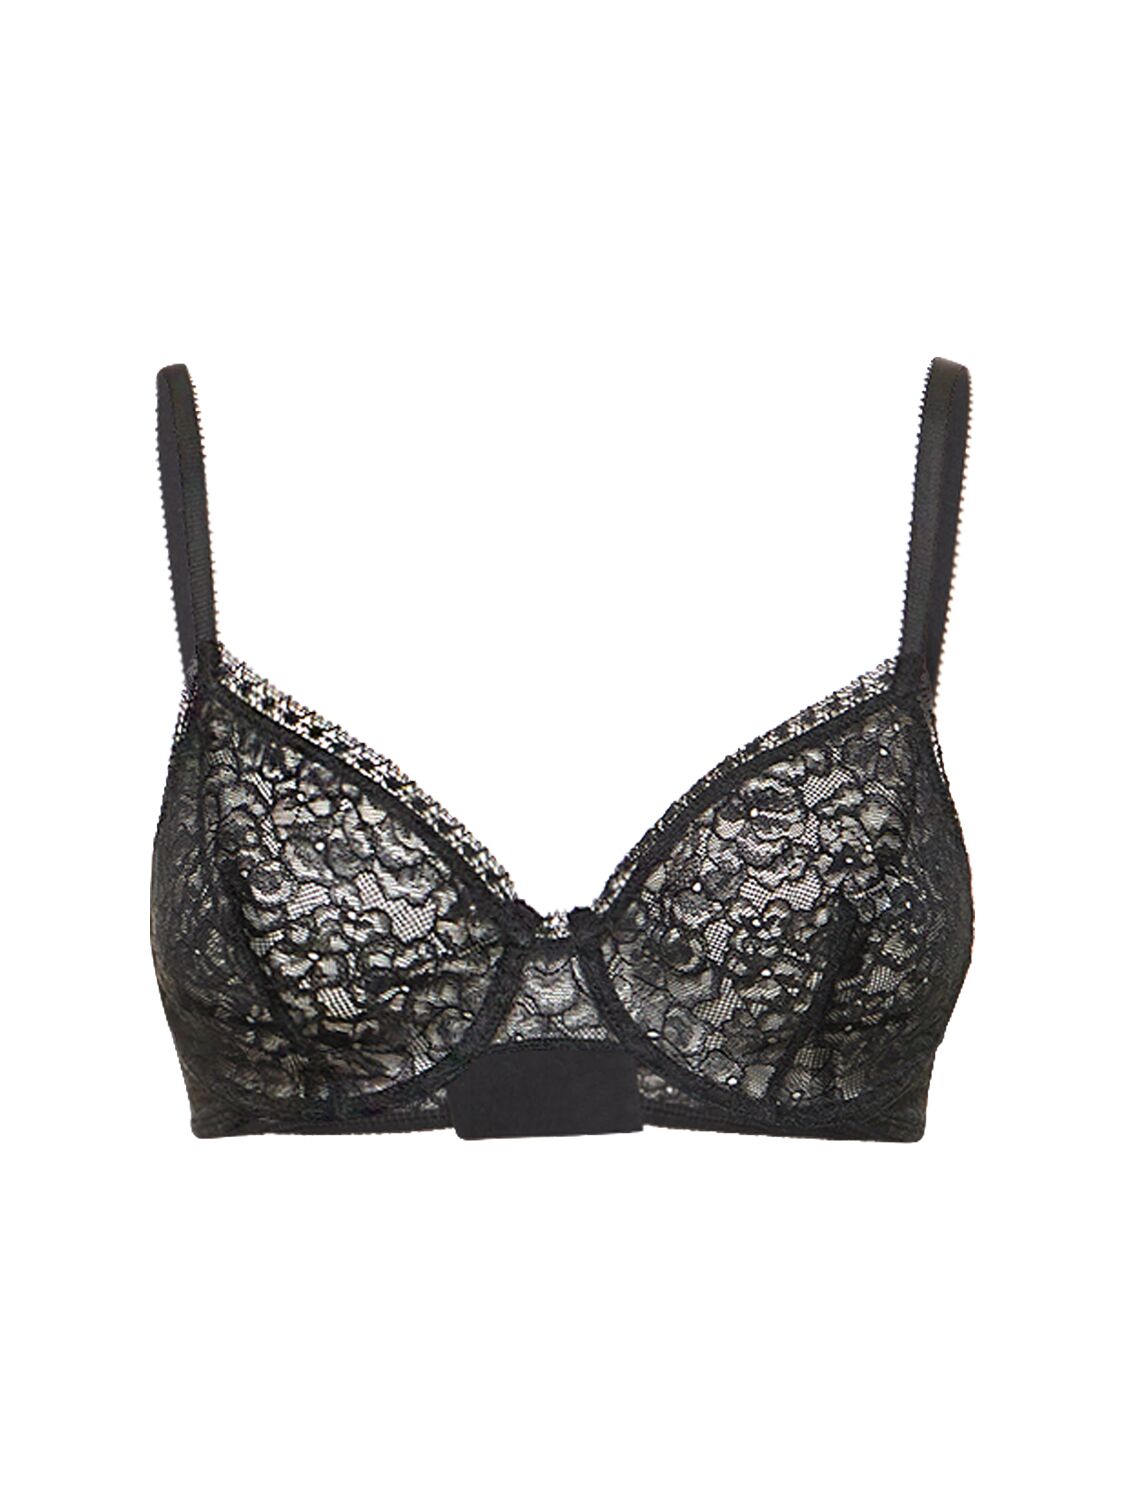 ERES Celeste Onctueux stretch-lace soft-cup triangle bra